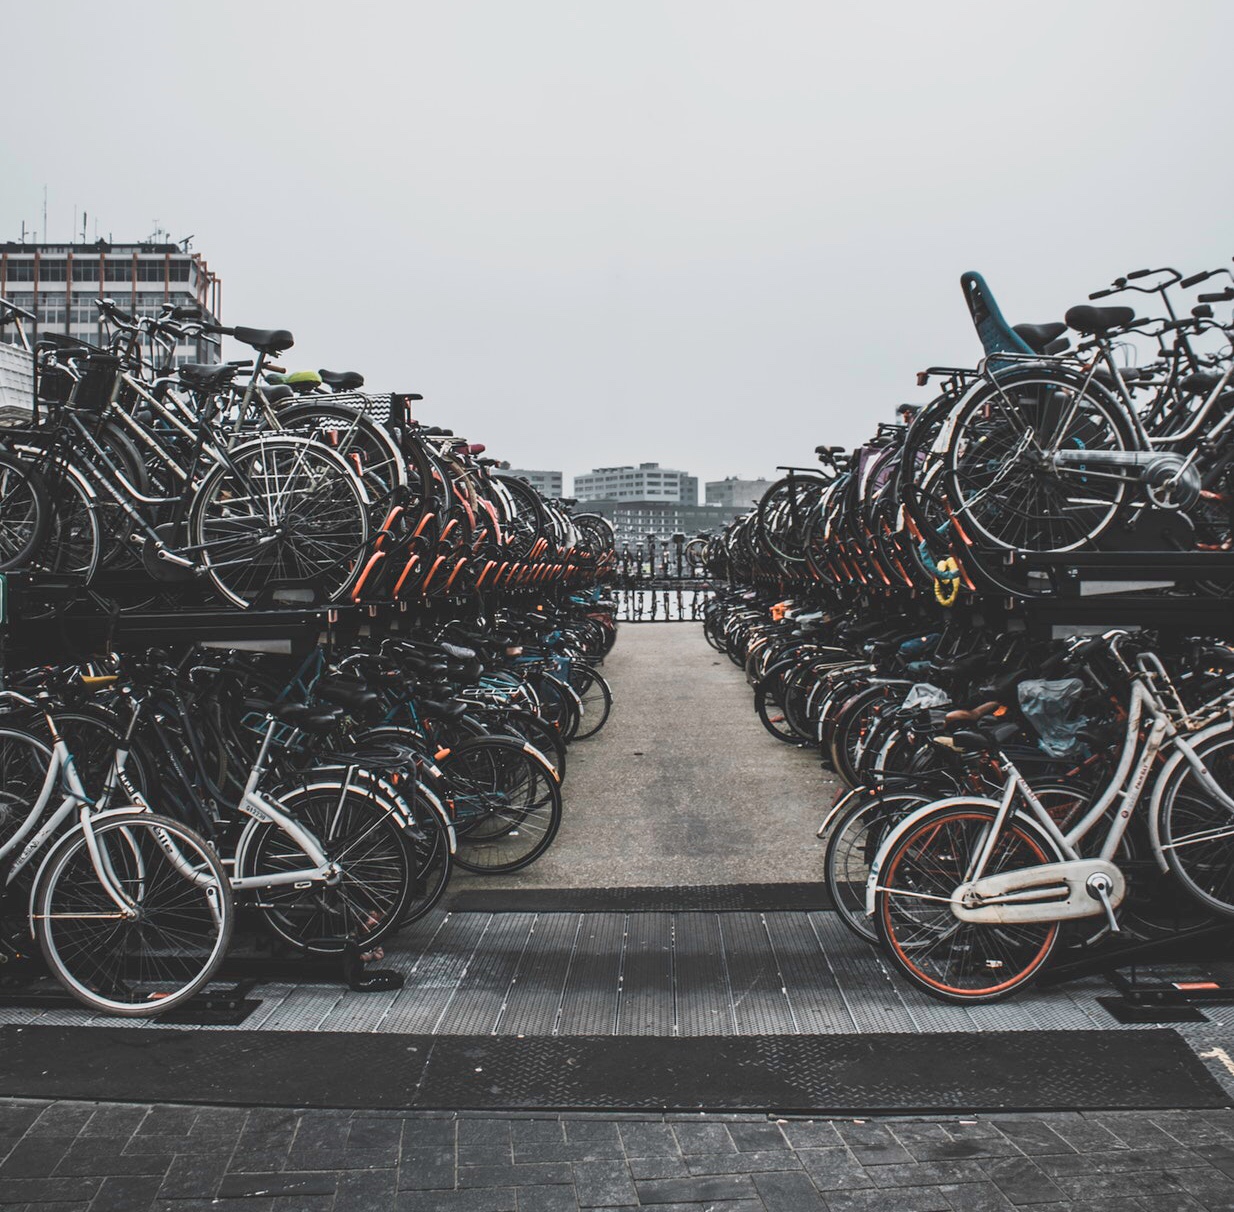 Despite the widespread use of bicycles as a primary mode of transport by many Dutch citizens, air pollution in the Netherlands is worse than European rules permit, and this is mainly due to heavy traffic in the larger cities of Amsterdam and Rotterdam.